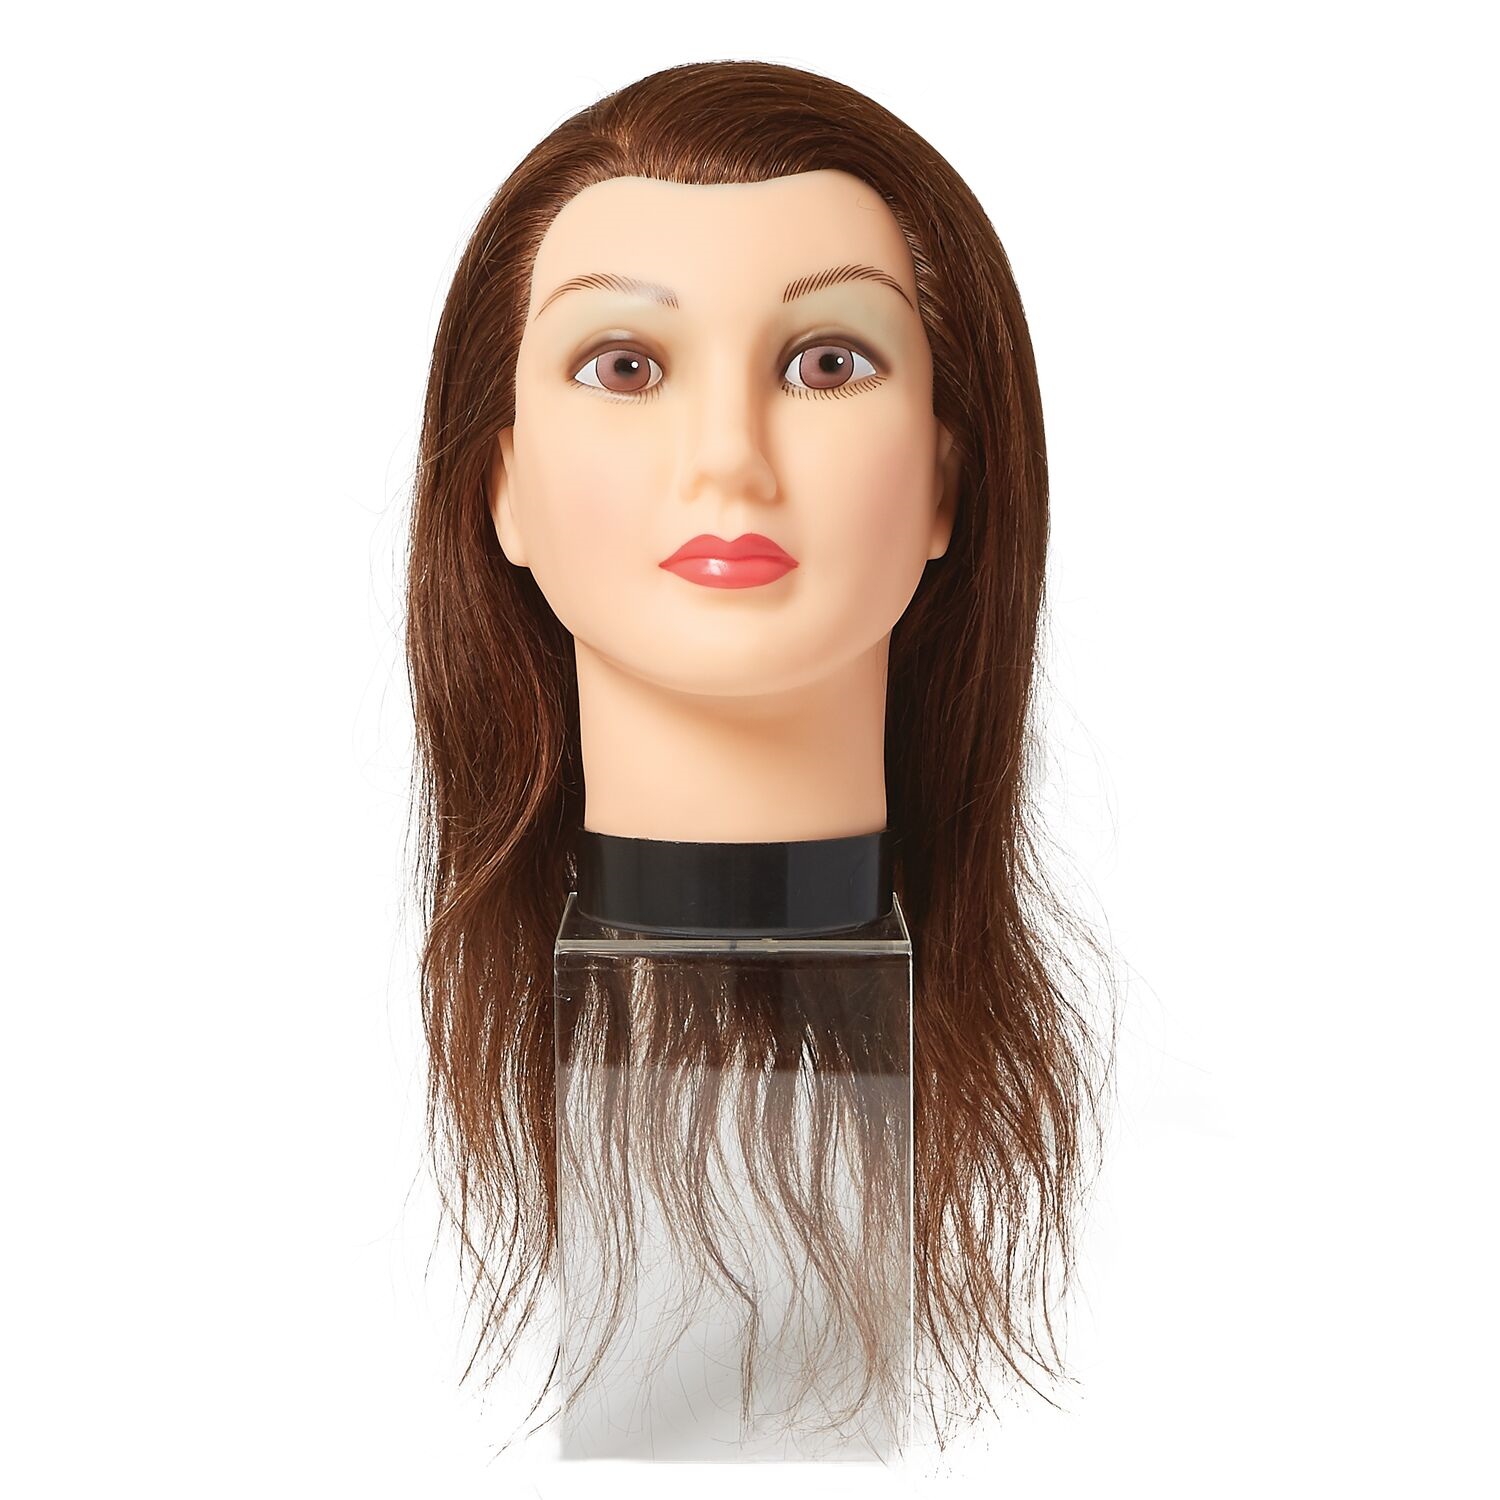 Best Two Never Been Used 'debra' Mannequin Heads From Sally Beauty Supply  for sale in Sylacauga, Alabama for 2024